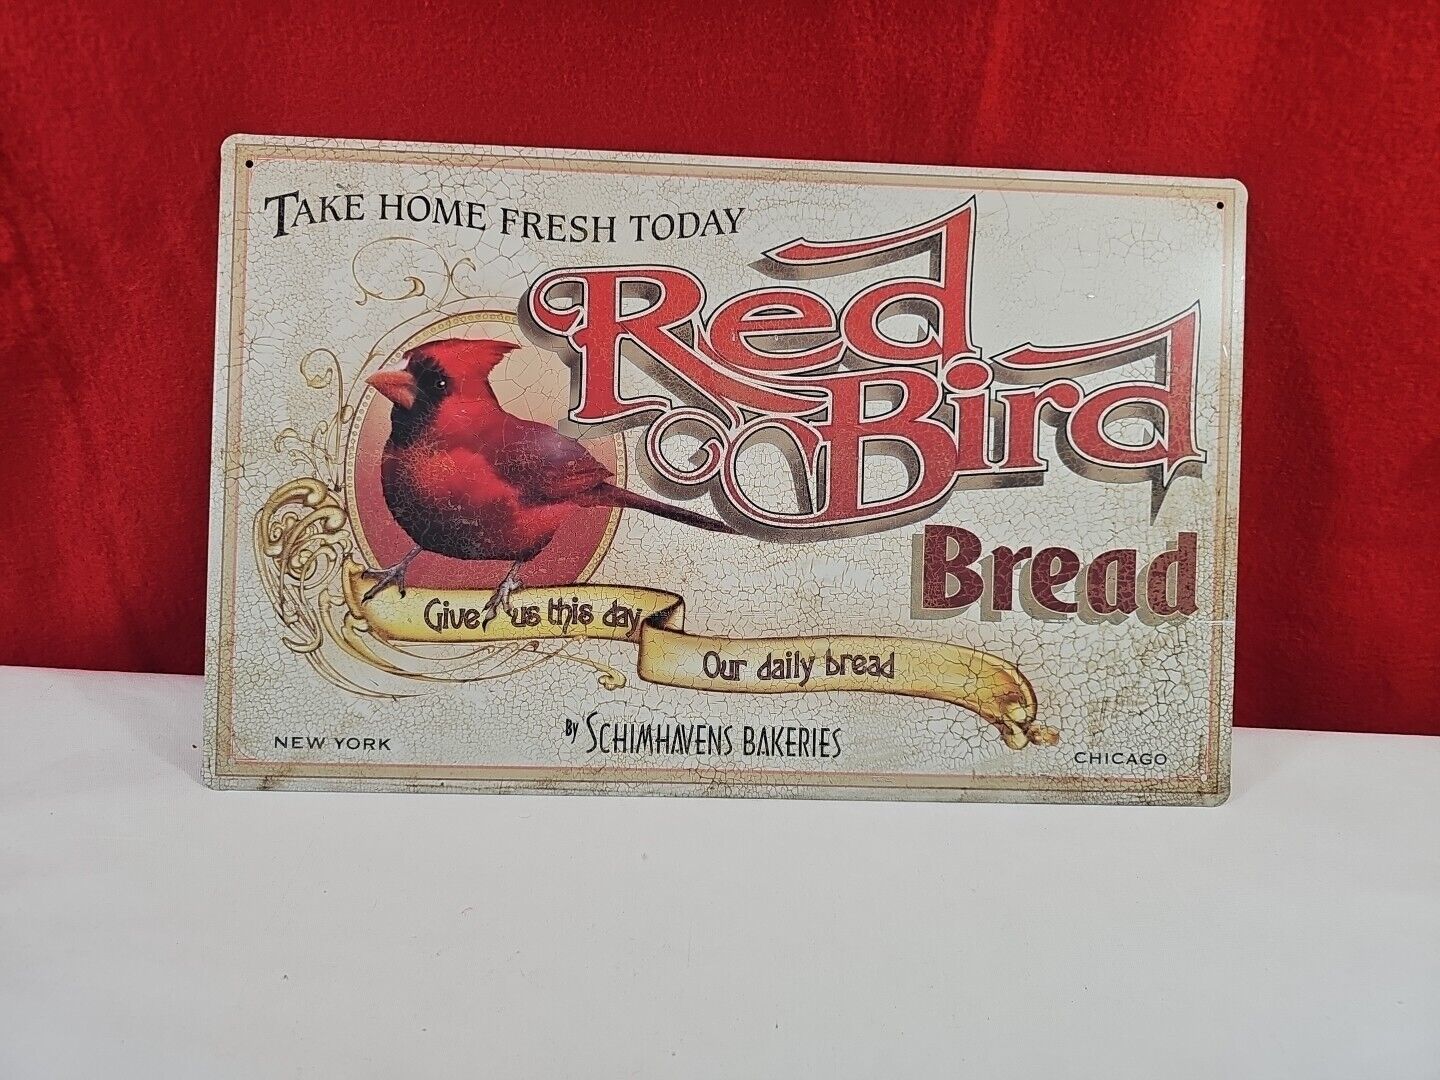 Take Home Fresh RED BIRD BREAD Wall Tin Advertising Sign By Schimavens Bakeries